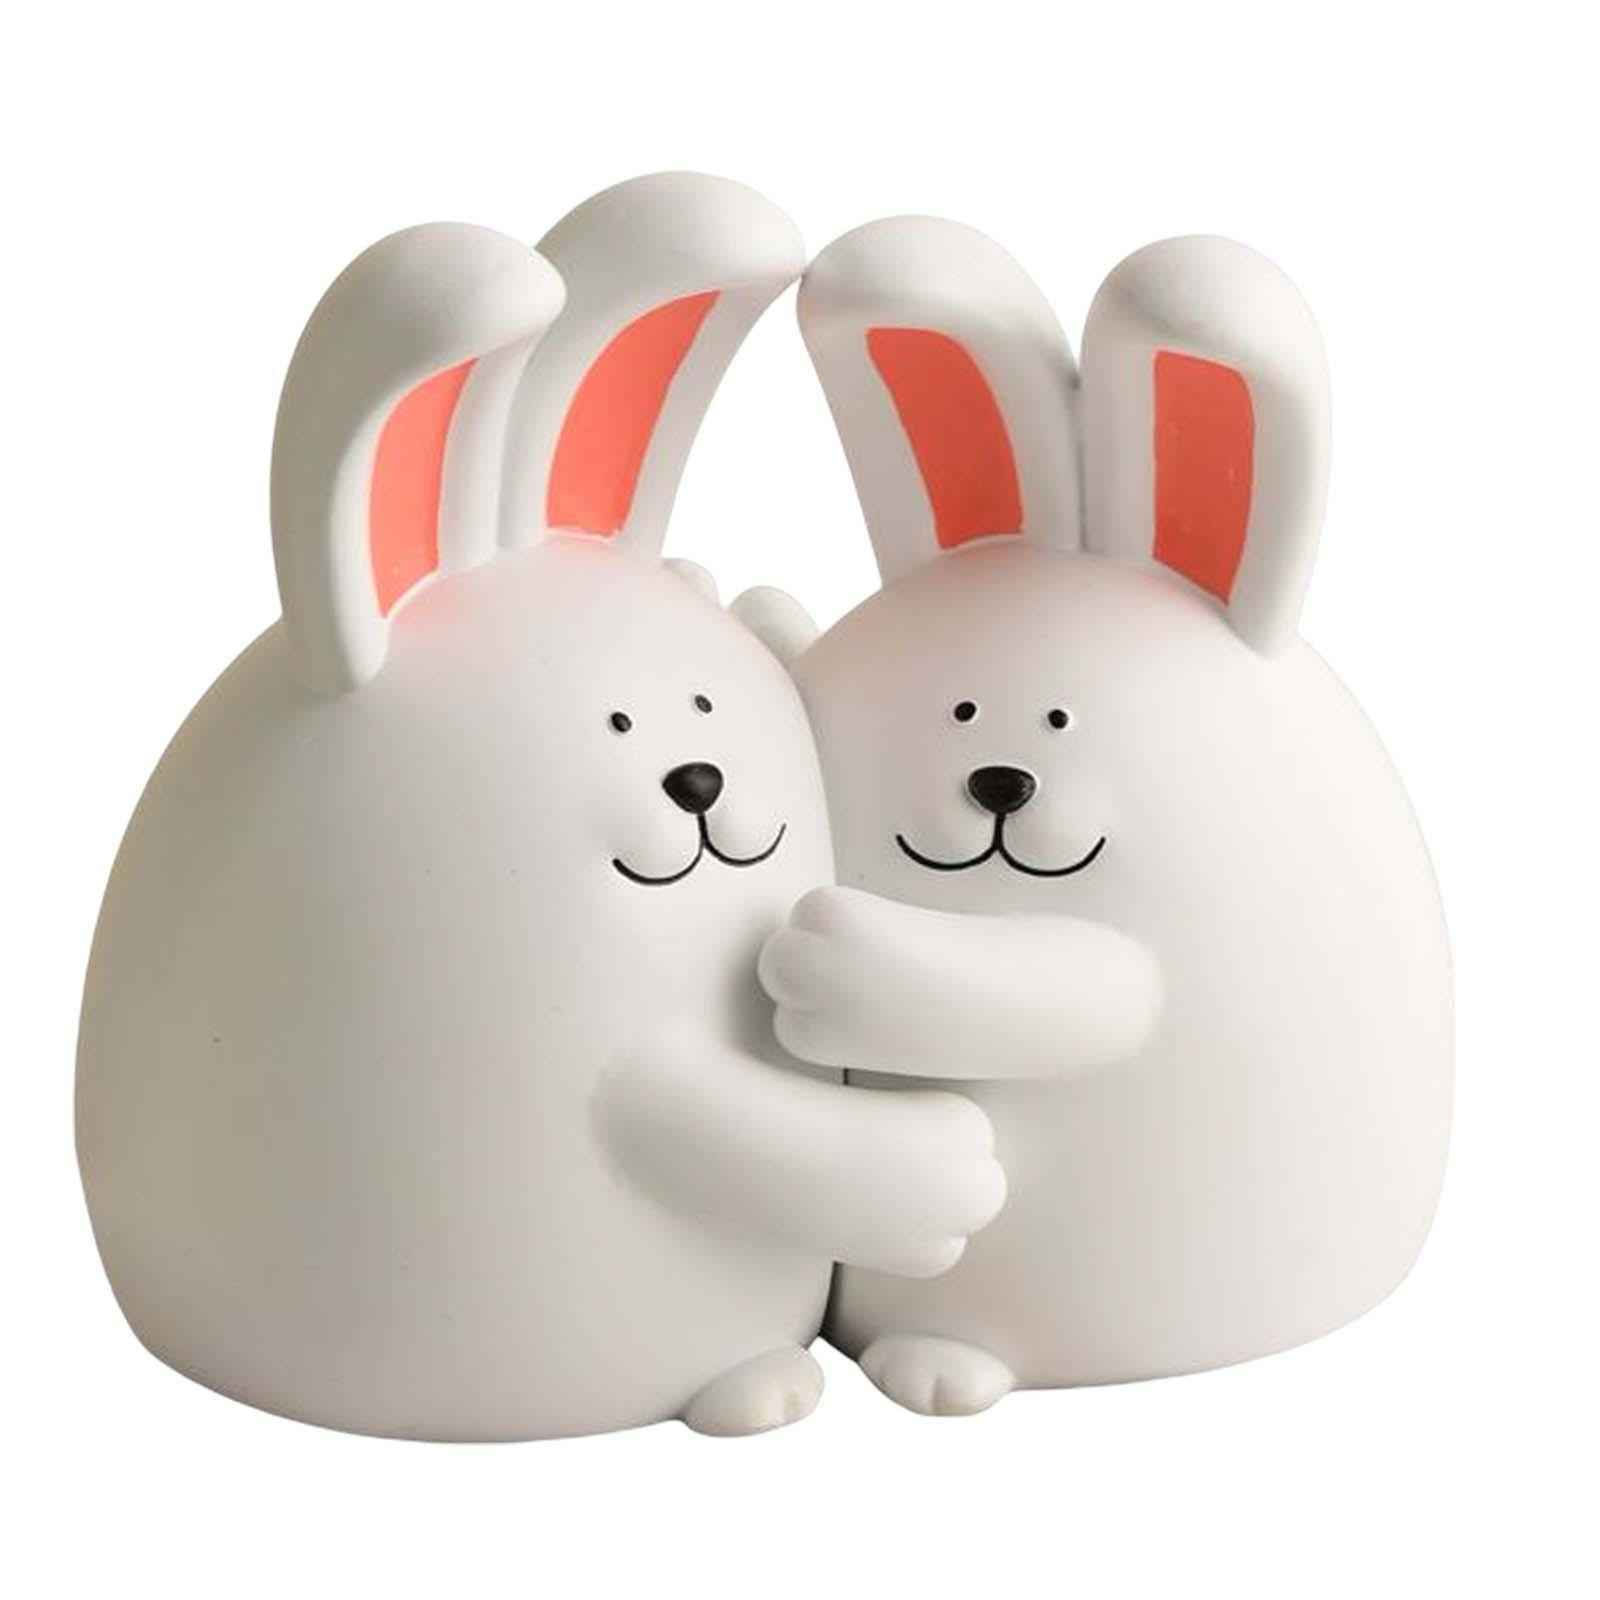 Cute Animal Decorative Bookends Resin Animal Figurines for Cabinet Home